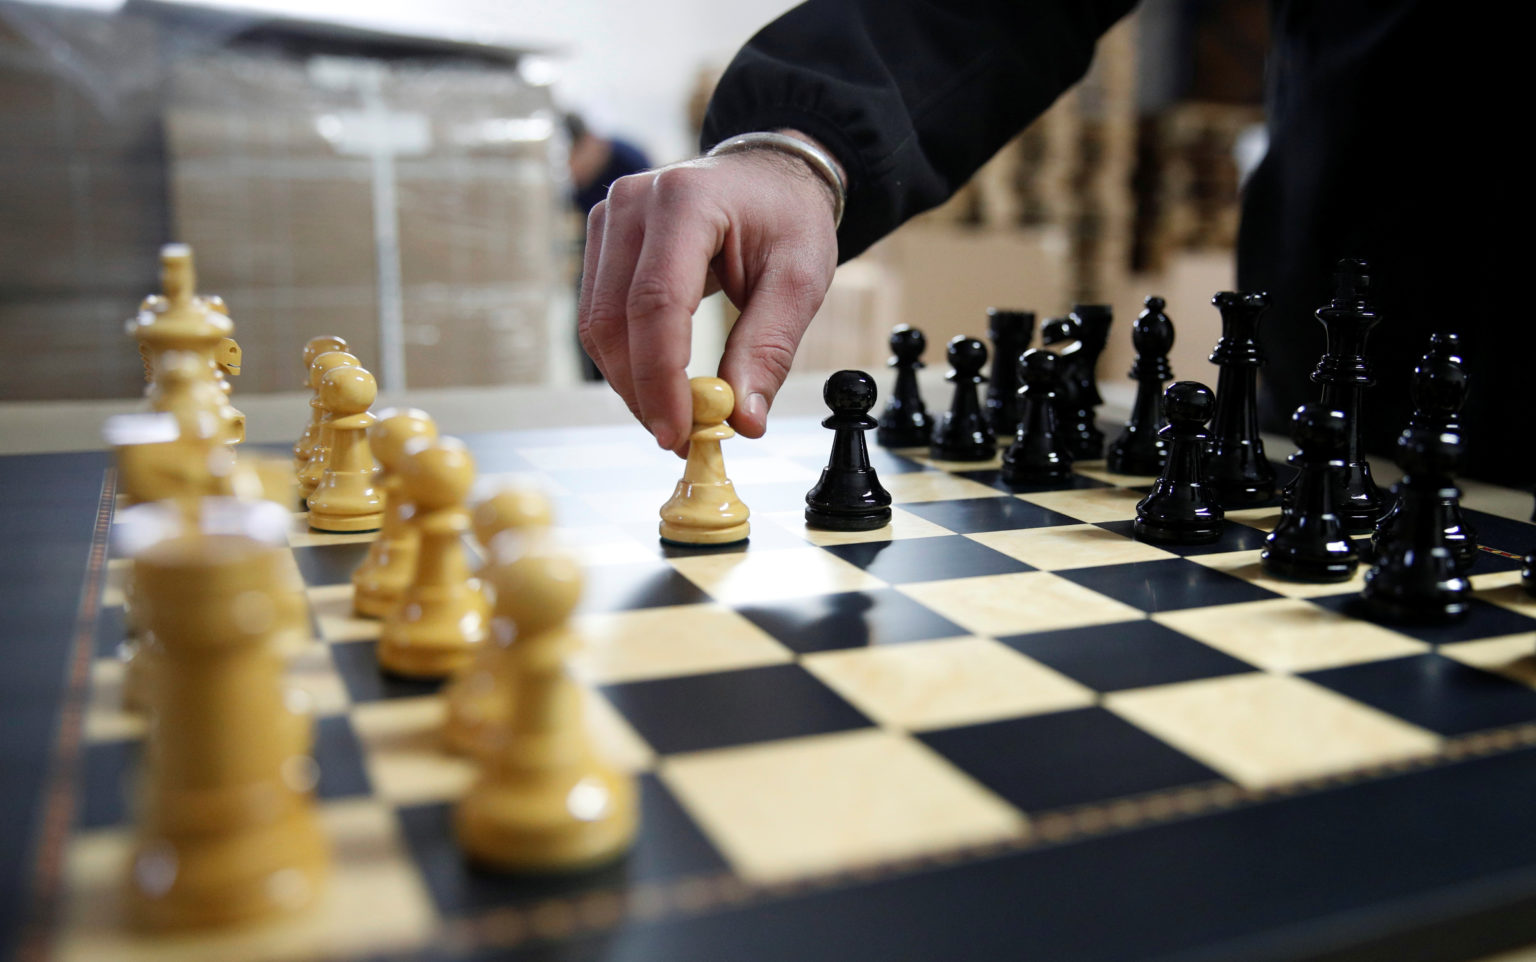 Spanish chess board sales soar after 'Queen's Gambit' cameo Inquirer